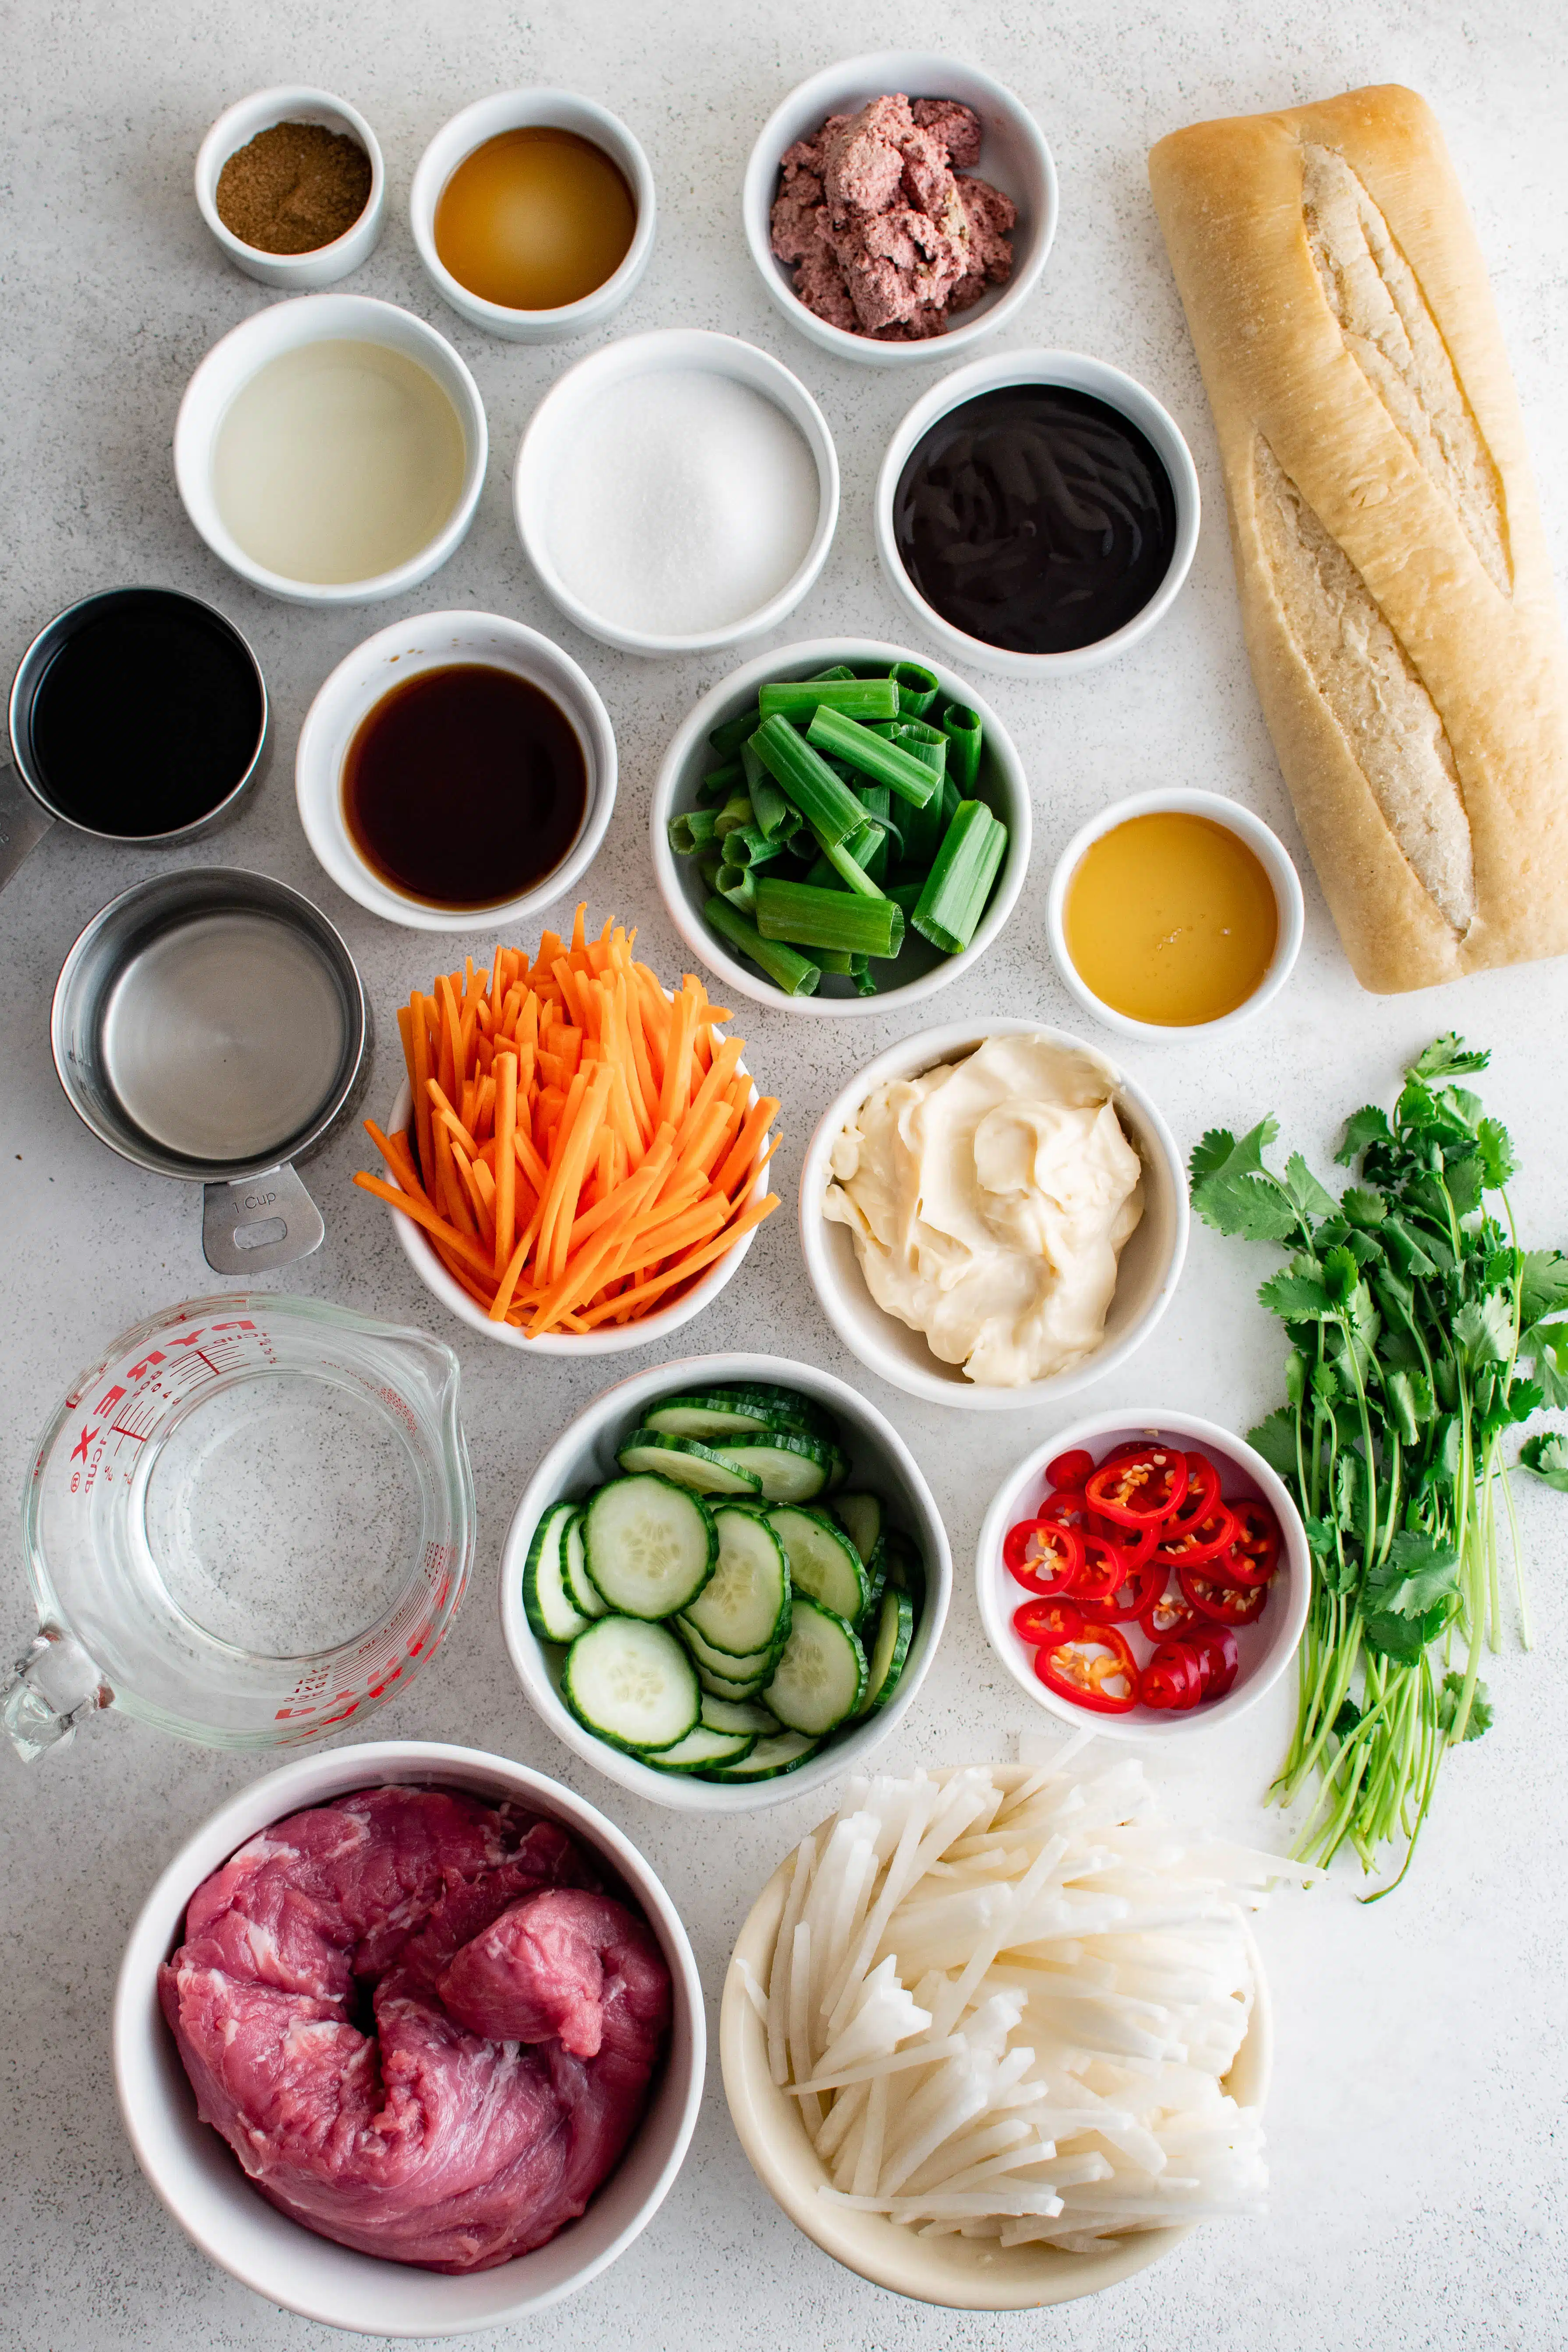 All of the ingredients needed to make Bánh Mì measured and set aside in individual white bowls.